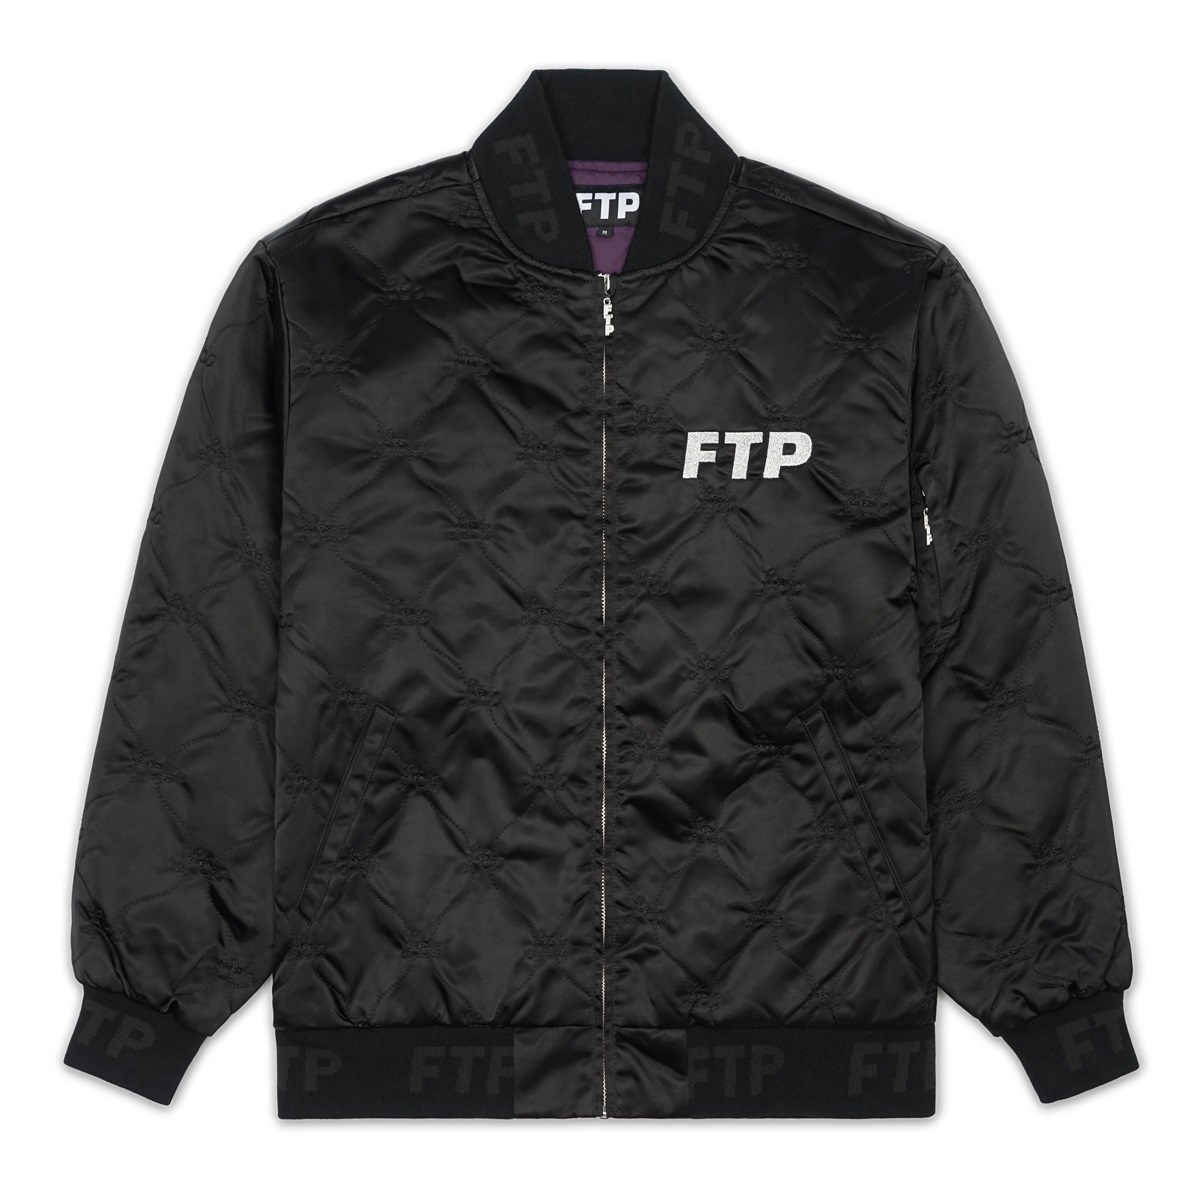 AnotherShop - Куртка FTP — Quilted Satin Bomber